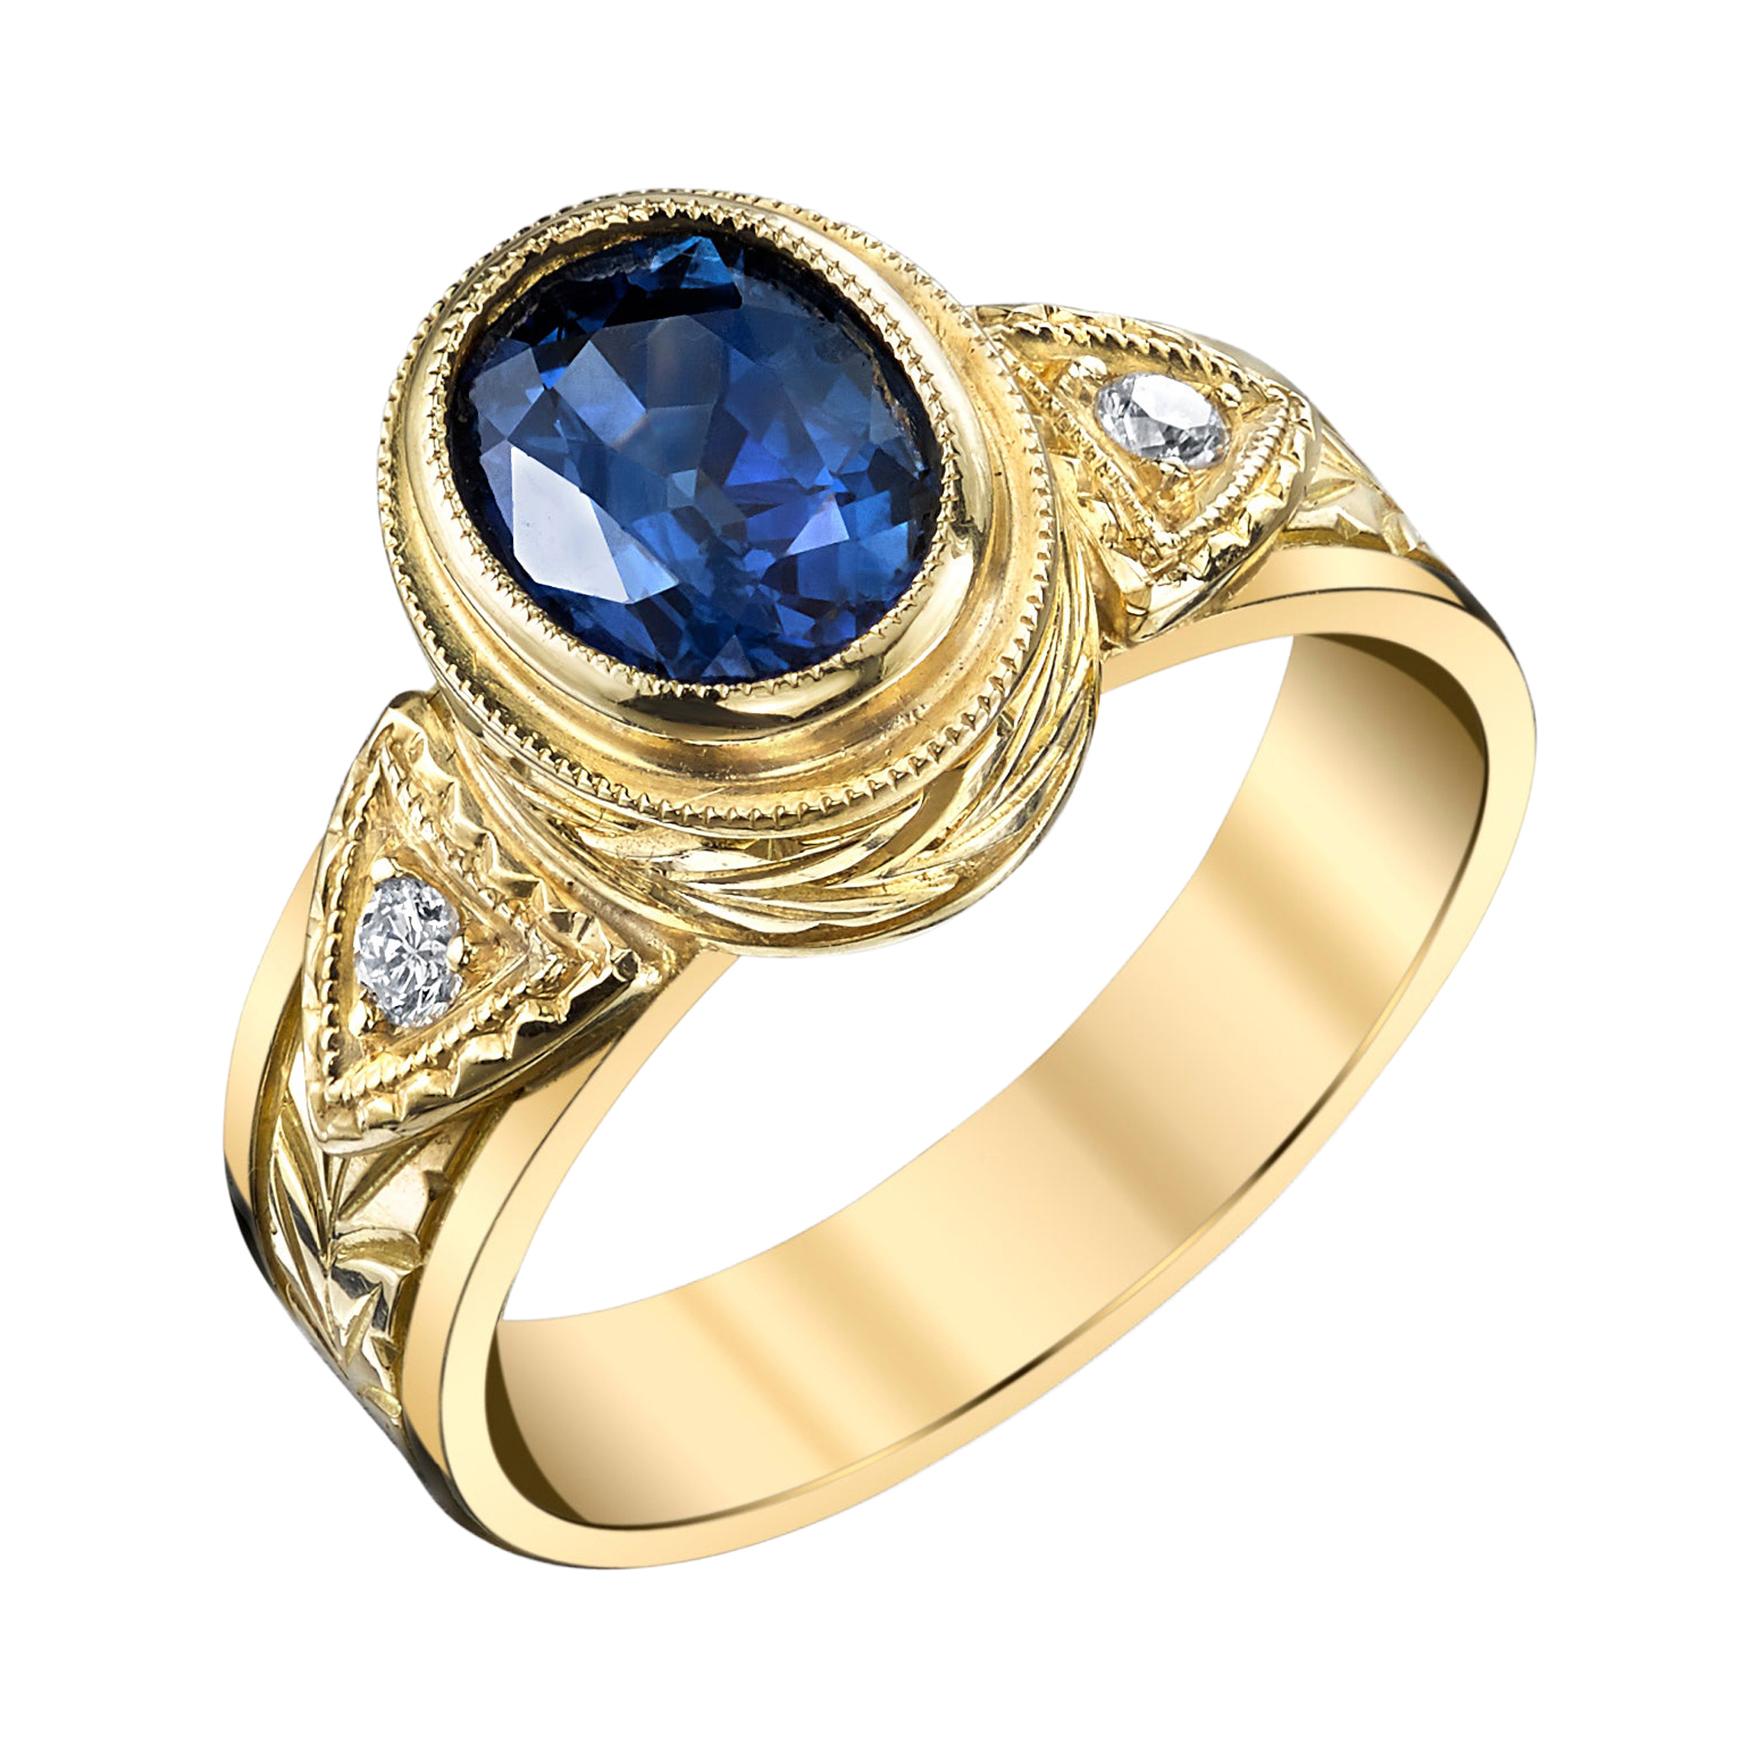 1.68 Carat Blue Sapphire and Diamond Hand-Engraved Band Ring in 18k Yellow Gold 